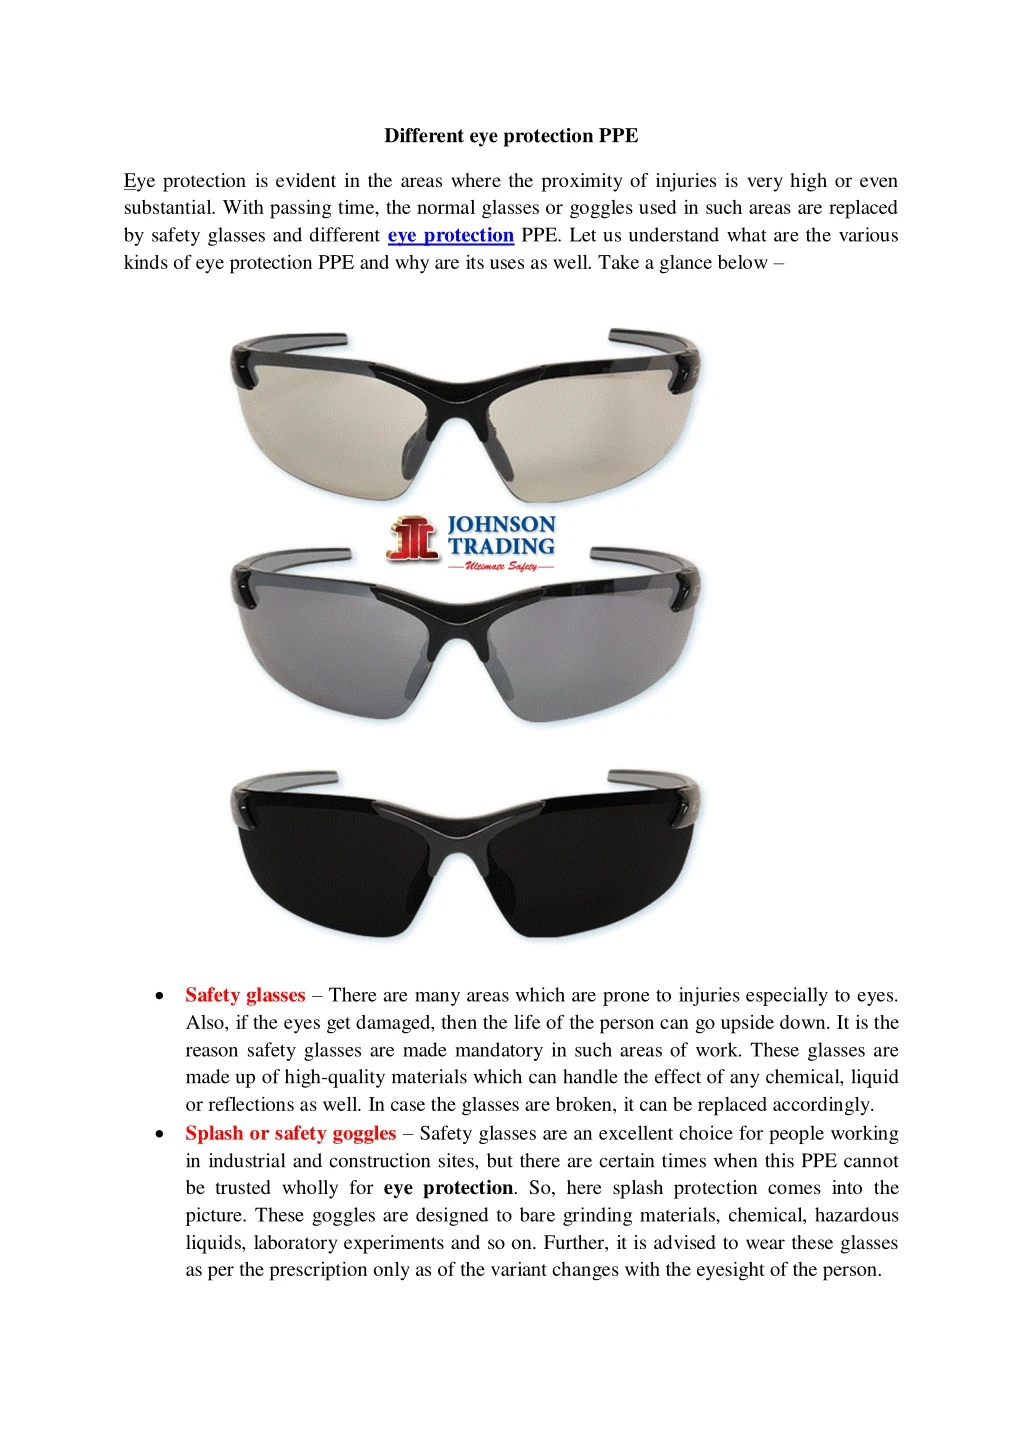 different eye protection ppe